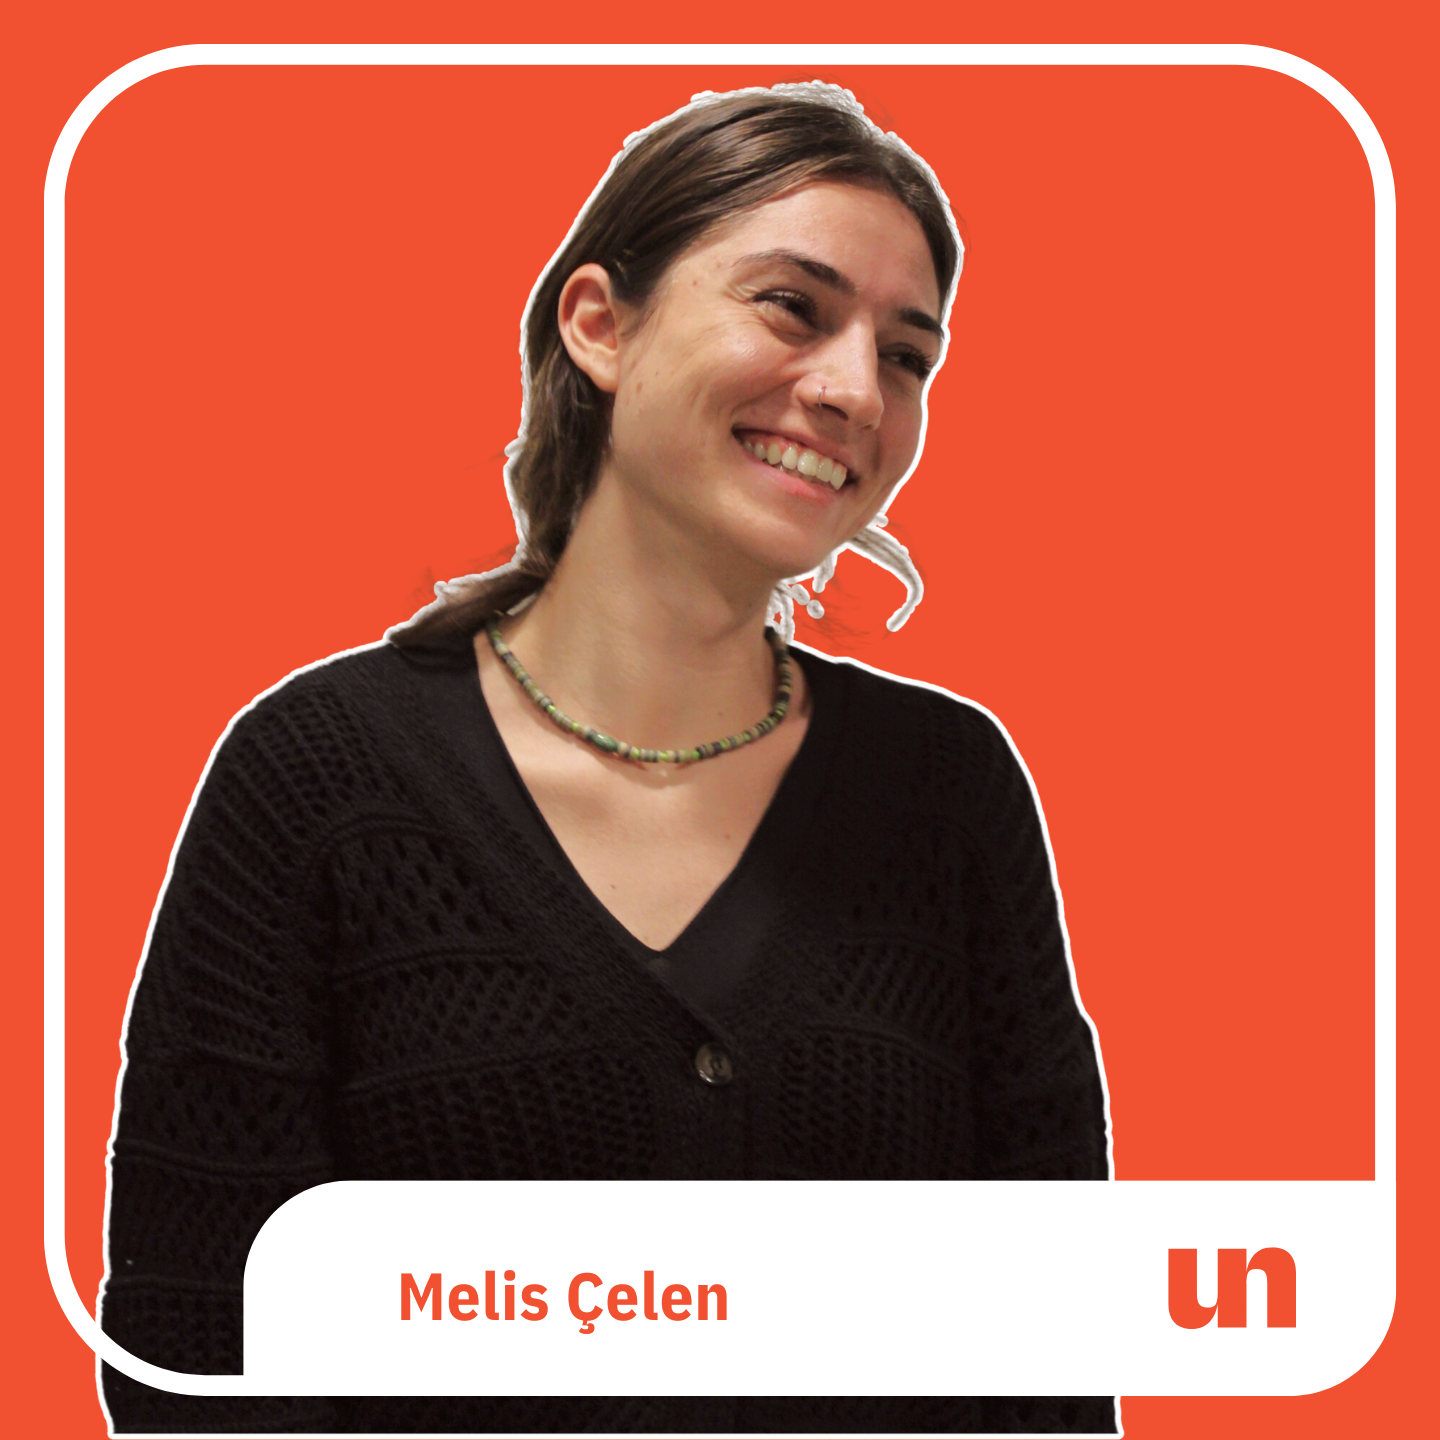 CLICK AND READ MORE ABOUT MELIS